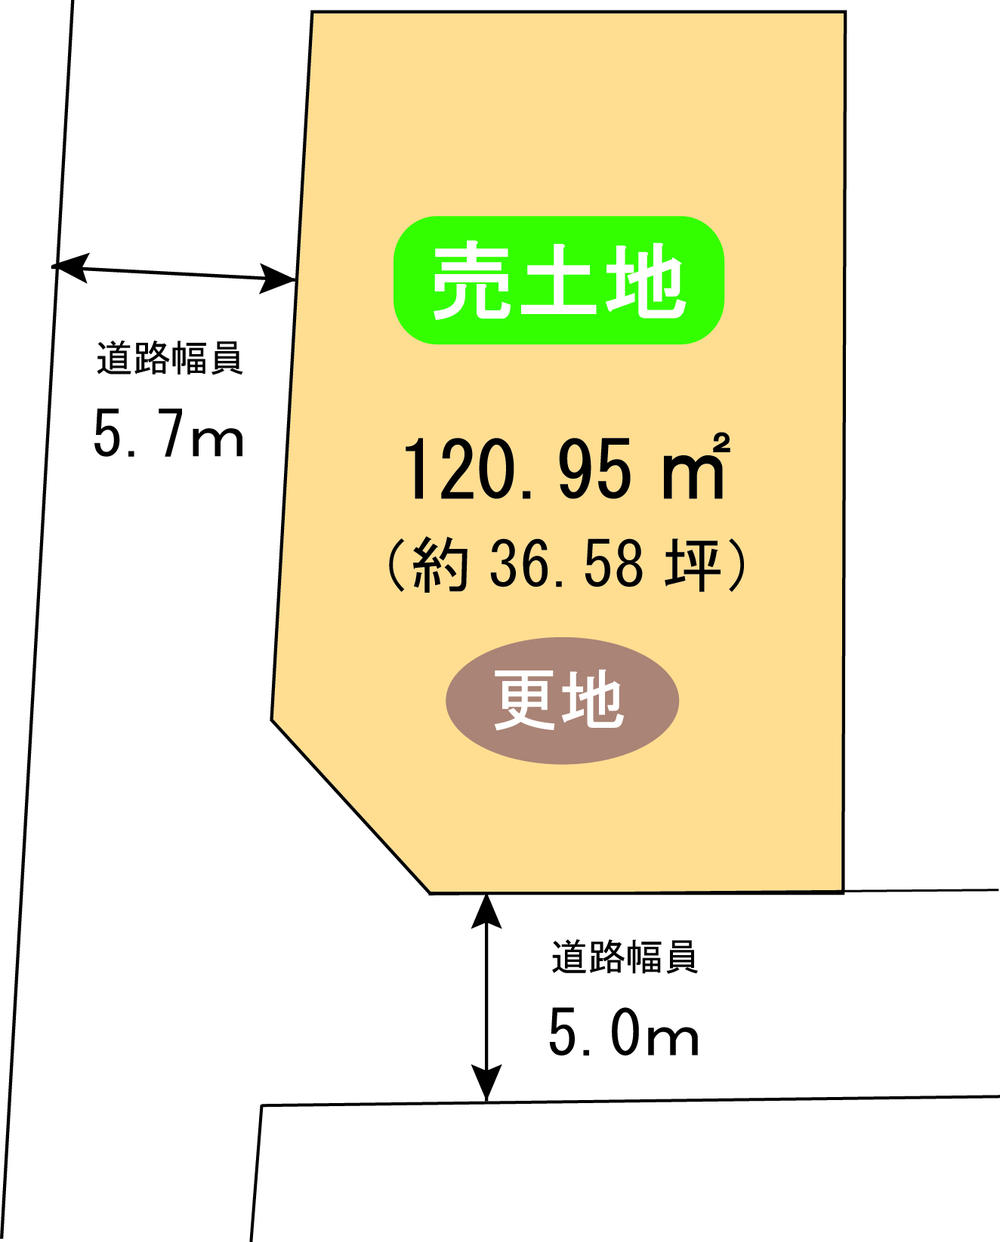 Local photos, including front road. Land price 23,002,000 yen, Land area 120.95 sq m , Corner lot